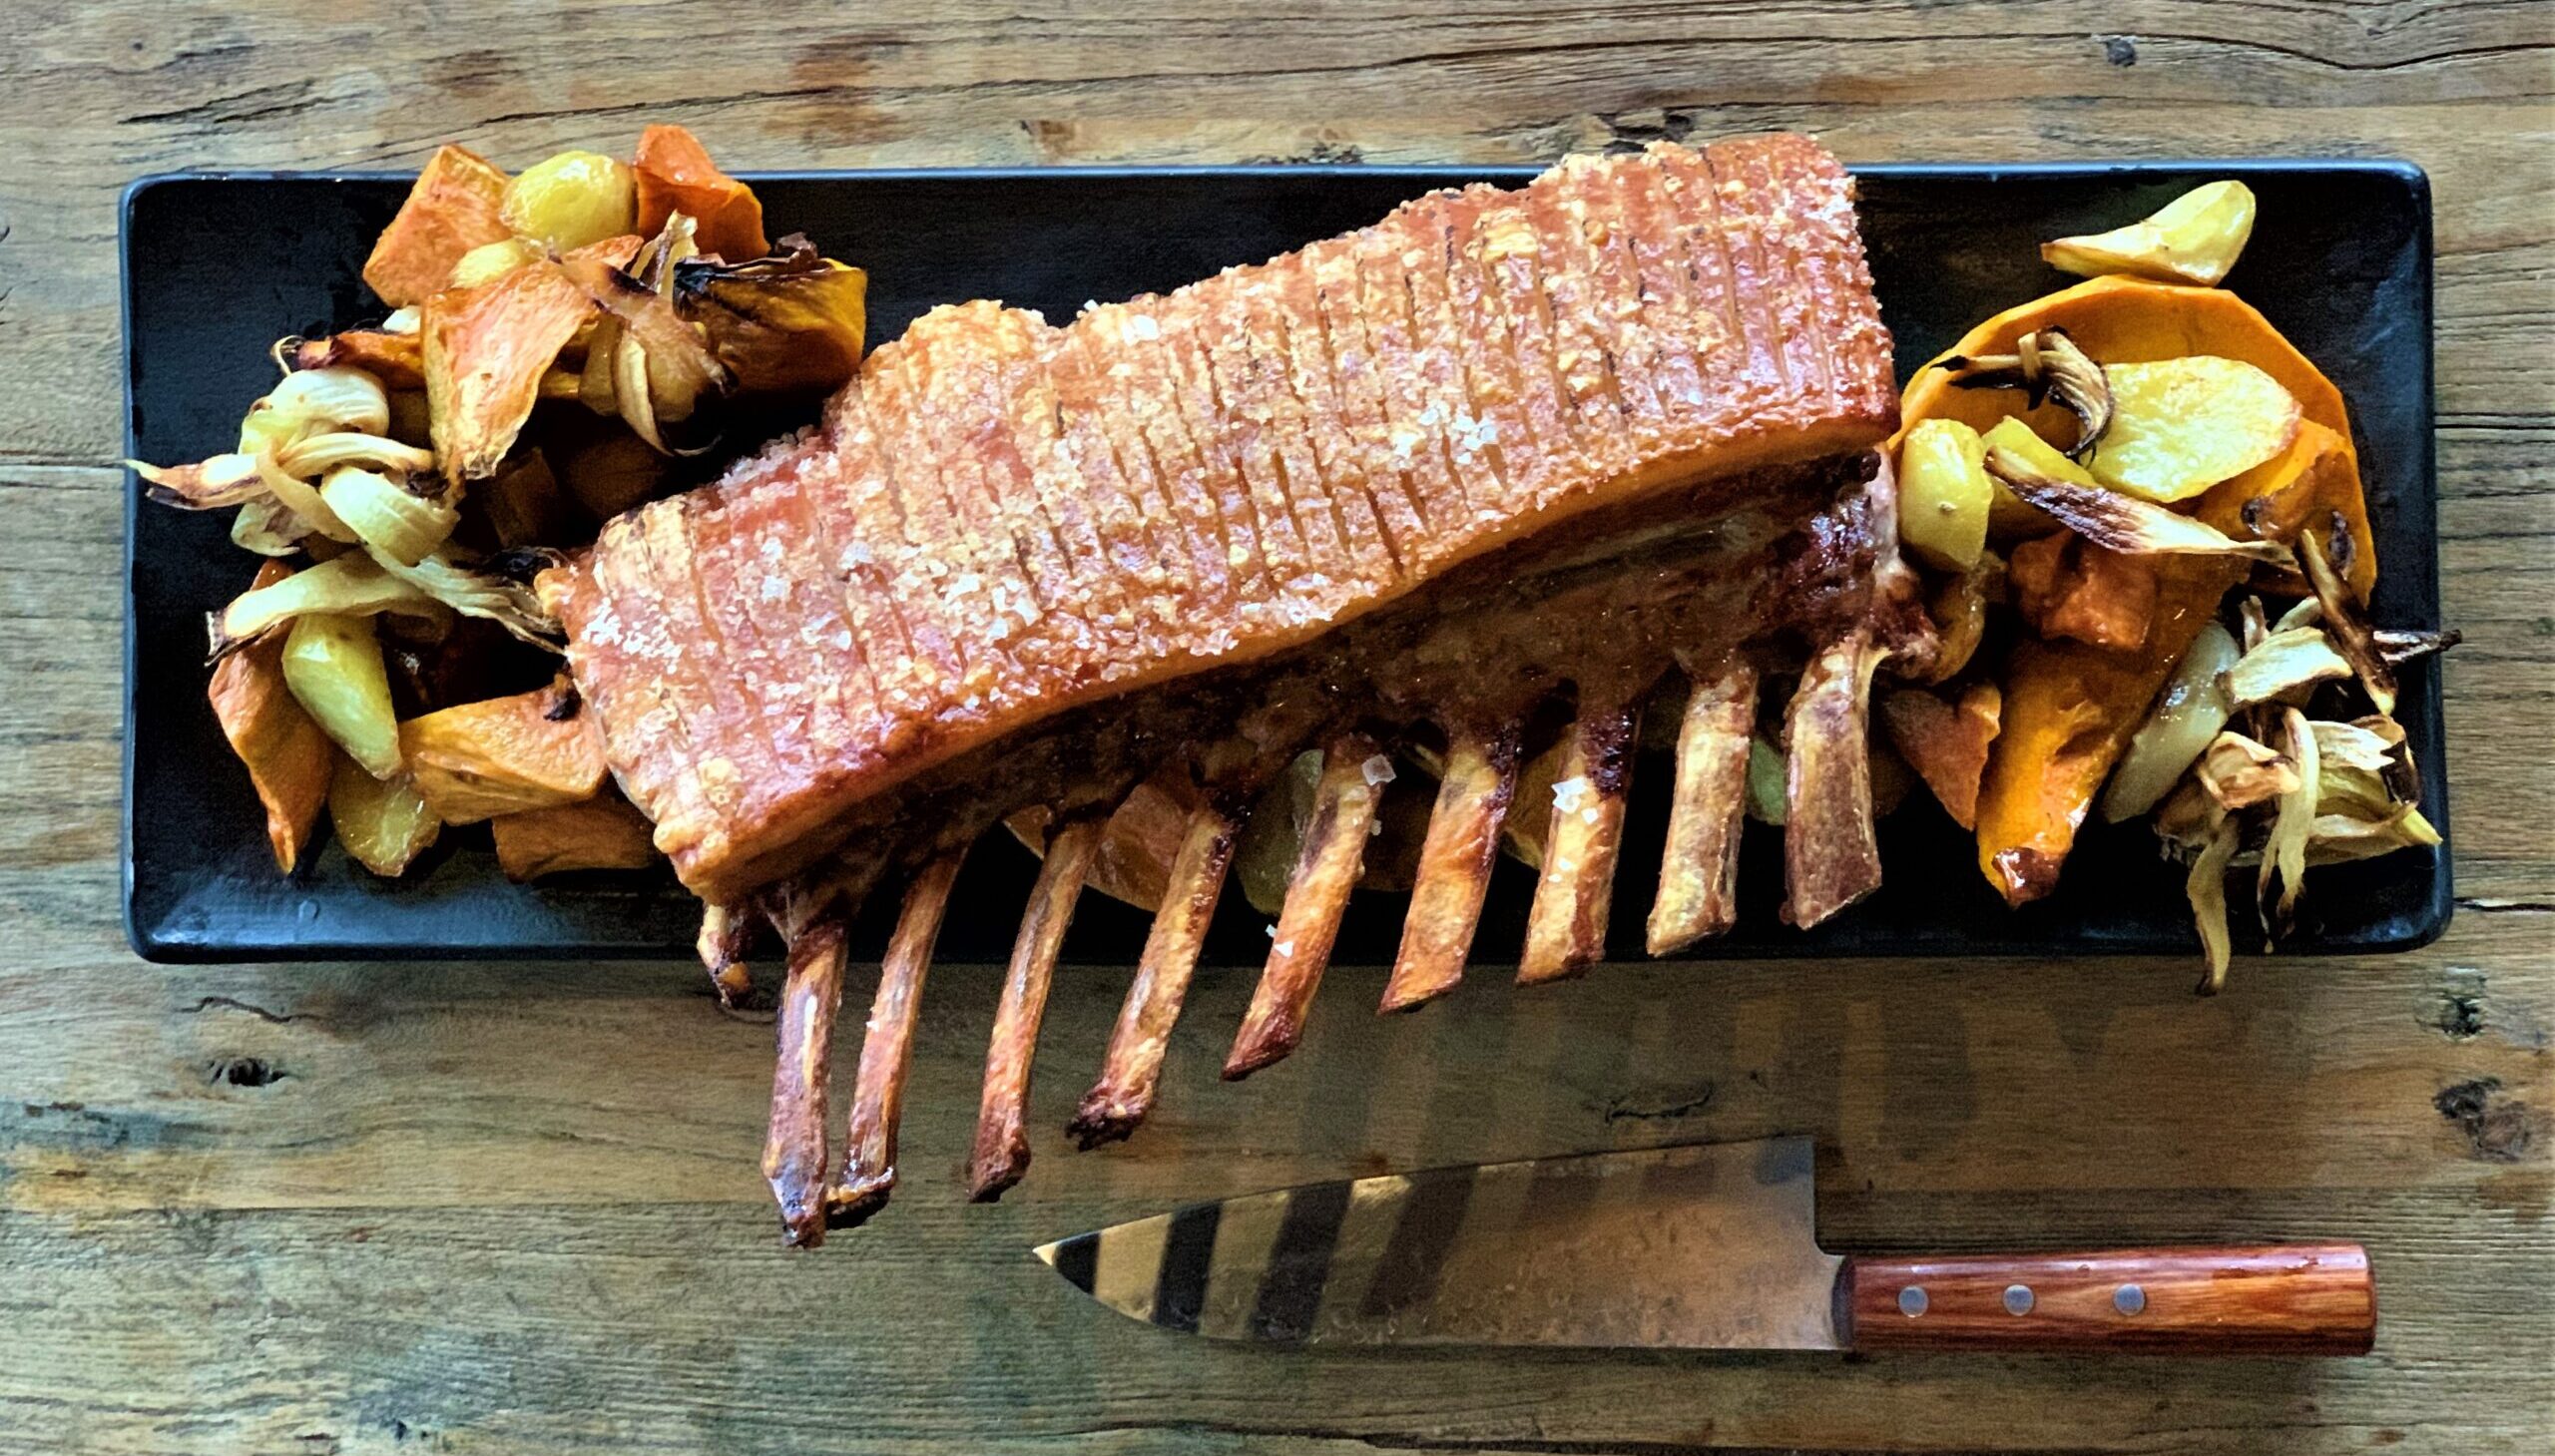 Pork ribs with crackling at Makepeace Island